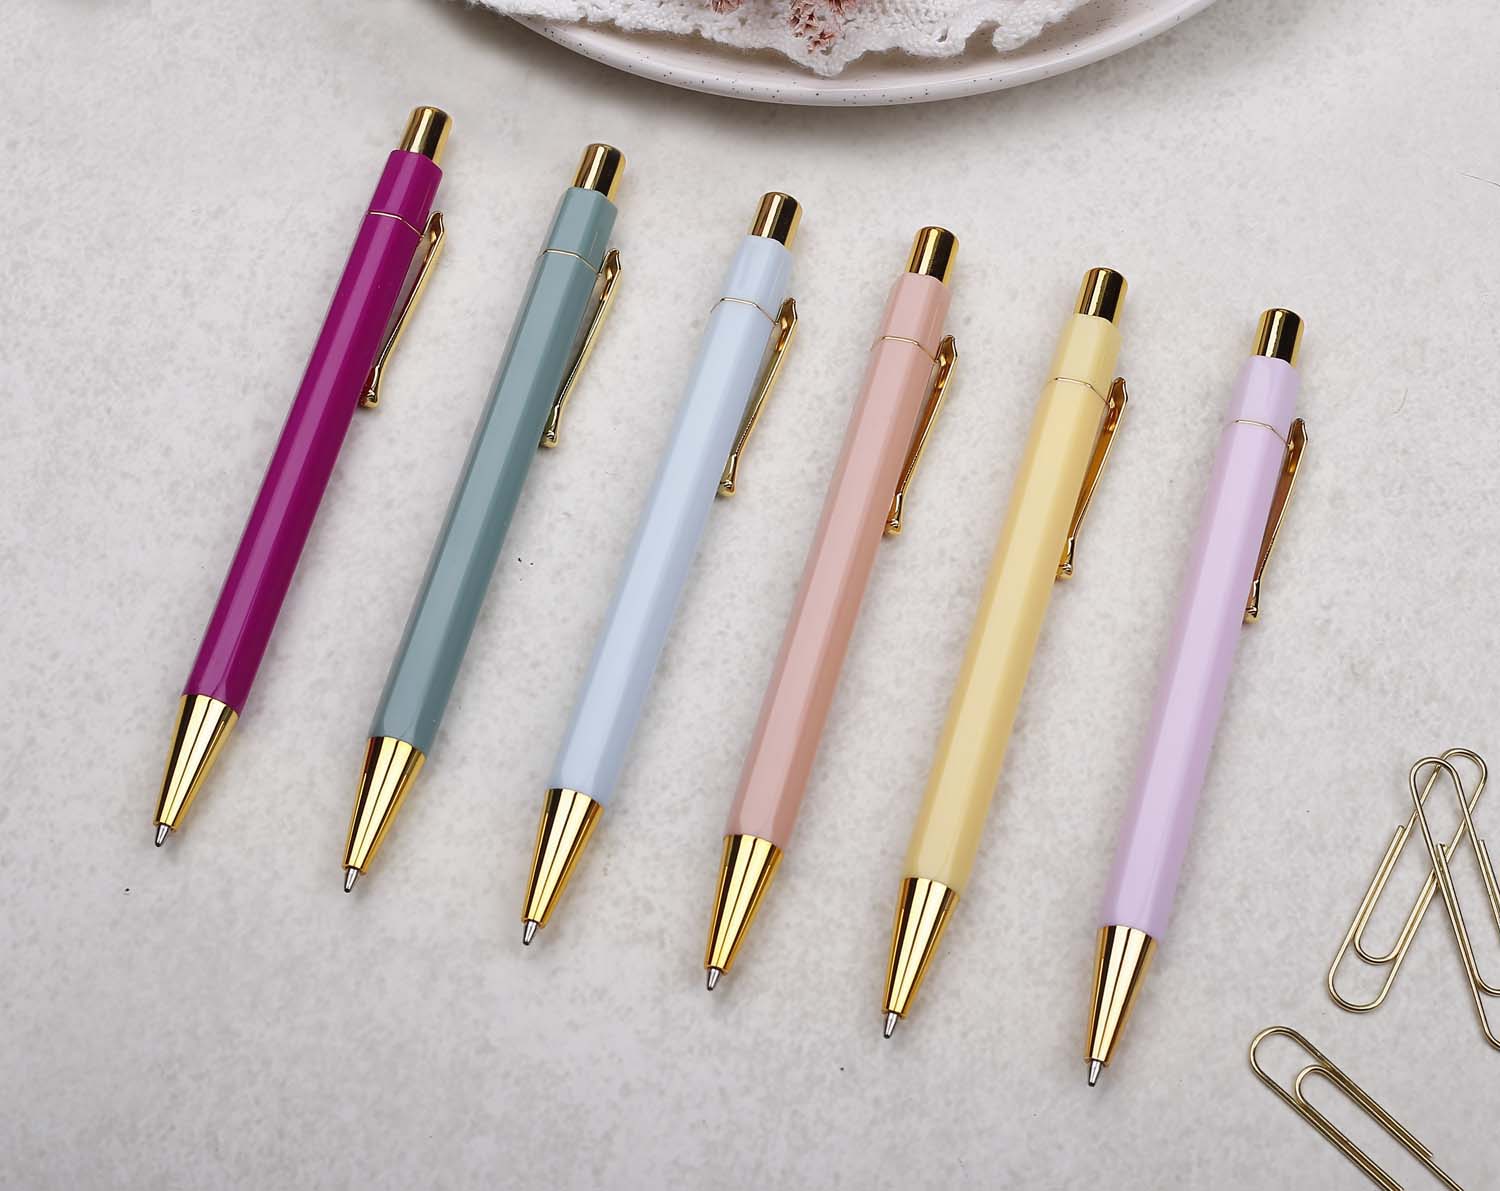 A premium pink and gold pen with ballpoint tip and hexagonal barrel detail